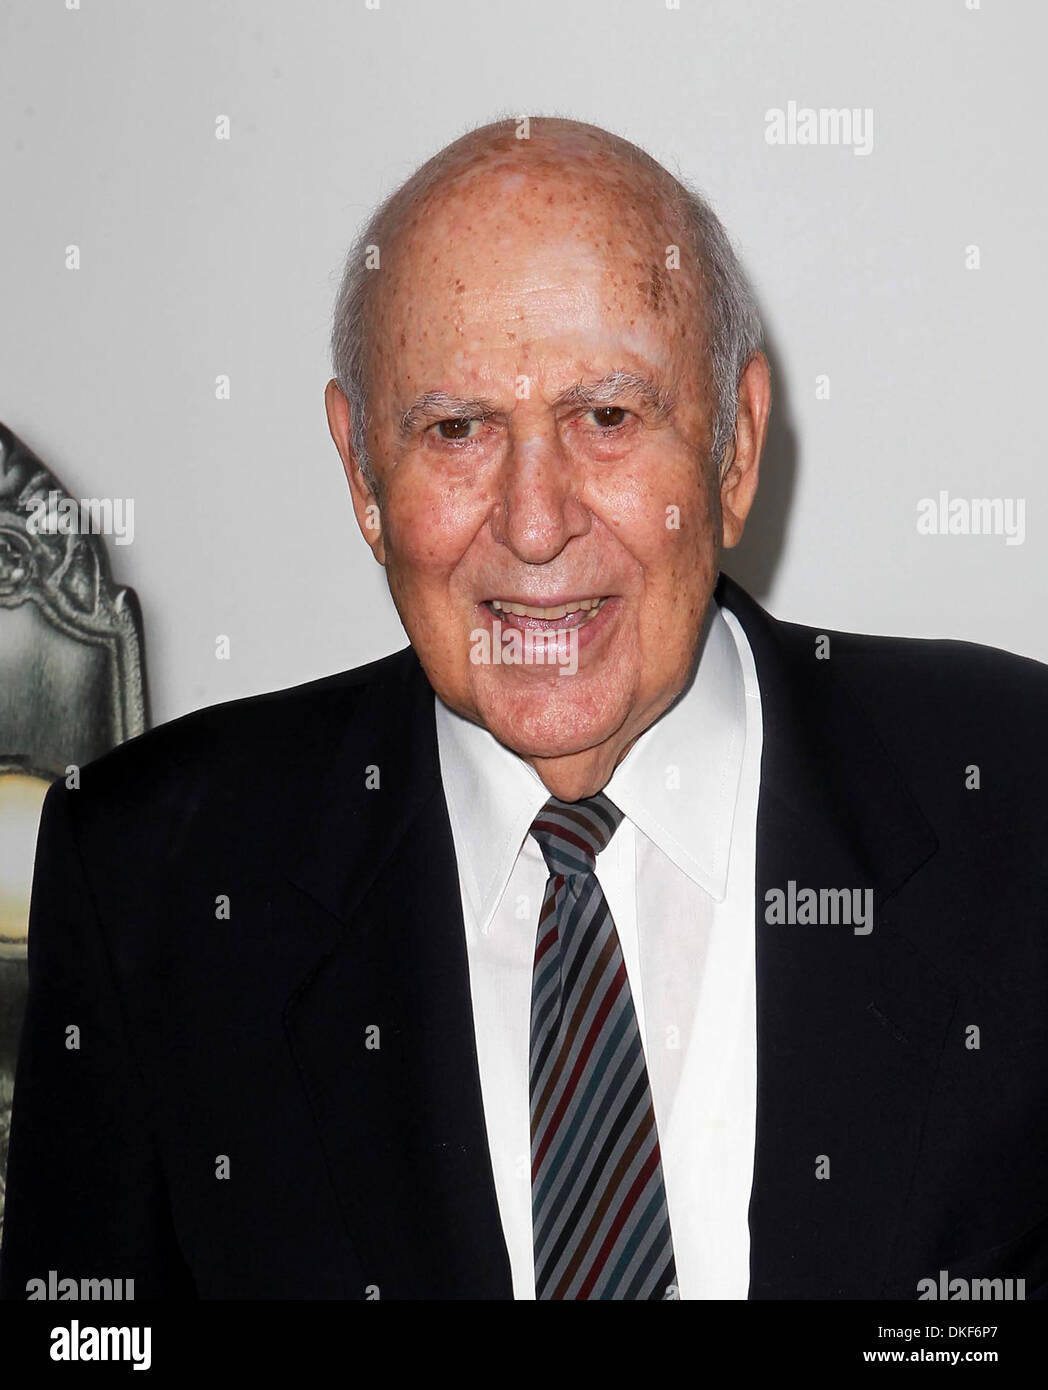 Carl Reiner 'The Book of Mormon' Opening night held at Pantages Theatre - Arrivals Hollywood California - 12.09.12 Stock Photo